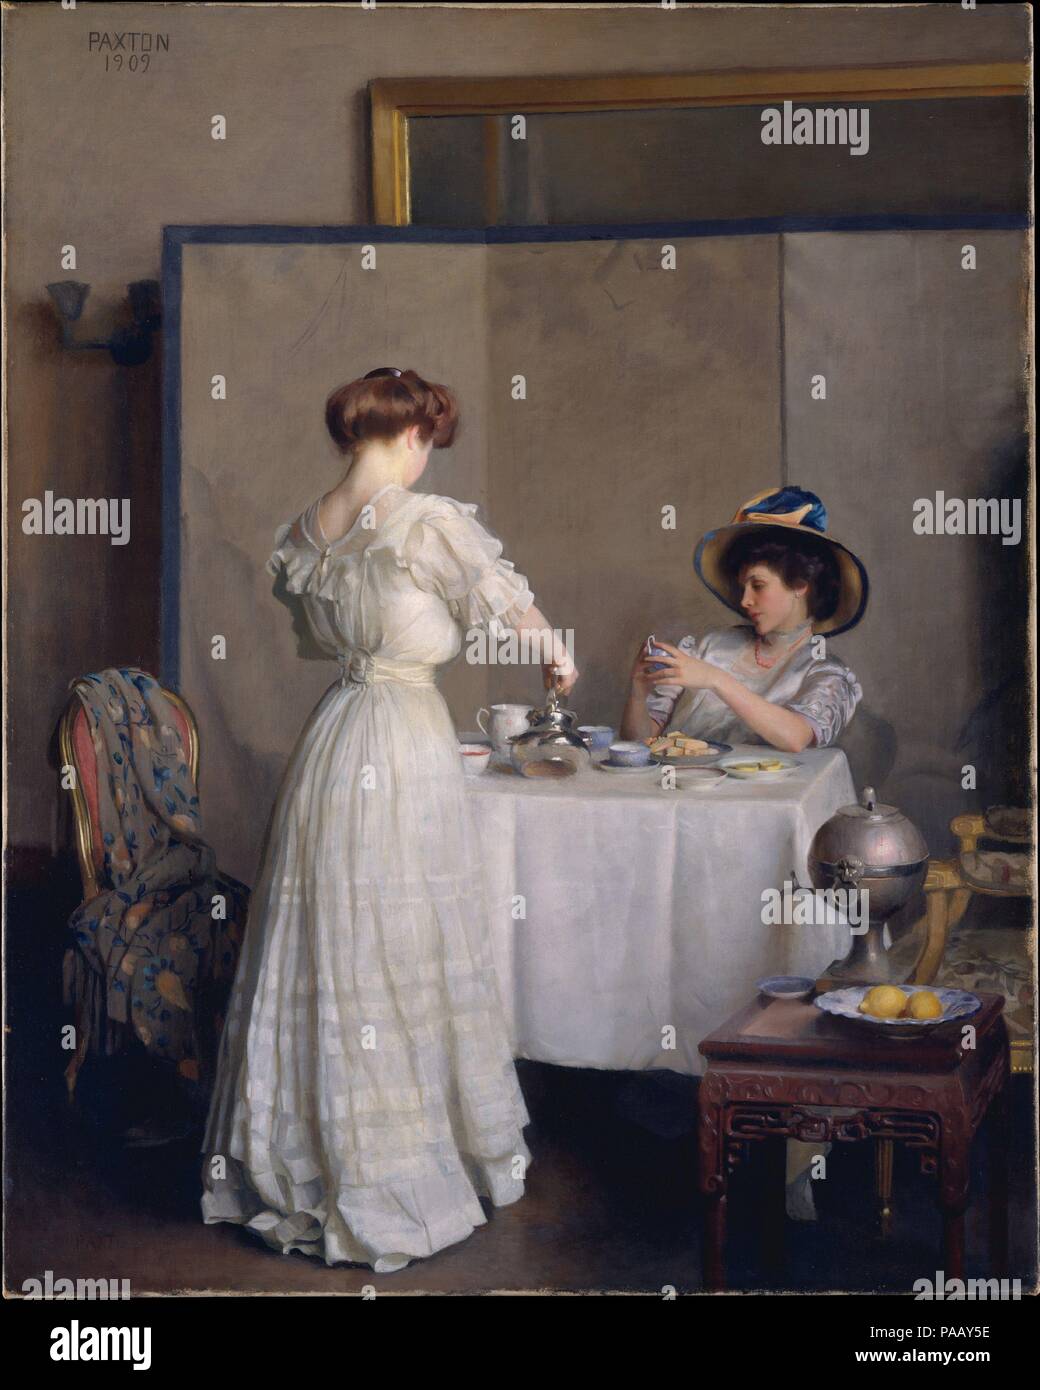 Tea Leaves. Artist: William McGregor Paxton (American, Baltimore, Maryland 1869-1941 Boston, Massachusetts). Dimensions: 36 1/8 x 28 3/4 in. (91.6 x 71.9 cm). Date: 1909.  Paxton often depicted refined women--such as his patrons' wives and daughters--at leisure in handsome Boston interiors of the sort they would have decorated and occupied. By equating women with the precious aesthetic trappings that surrounded them, Paxton echoed the spirit of the novelist Henry James, who portrayed women as collectible objects in novels such as Portrait of a Lady (1881). Paxton's restrained palette and preci Stock Photo